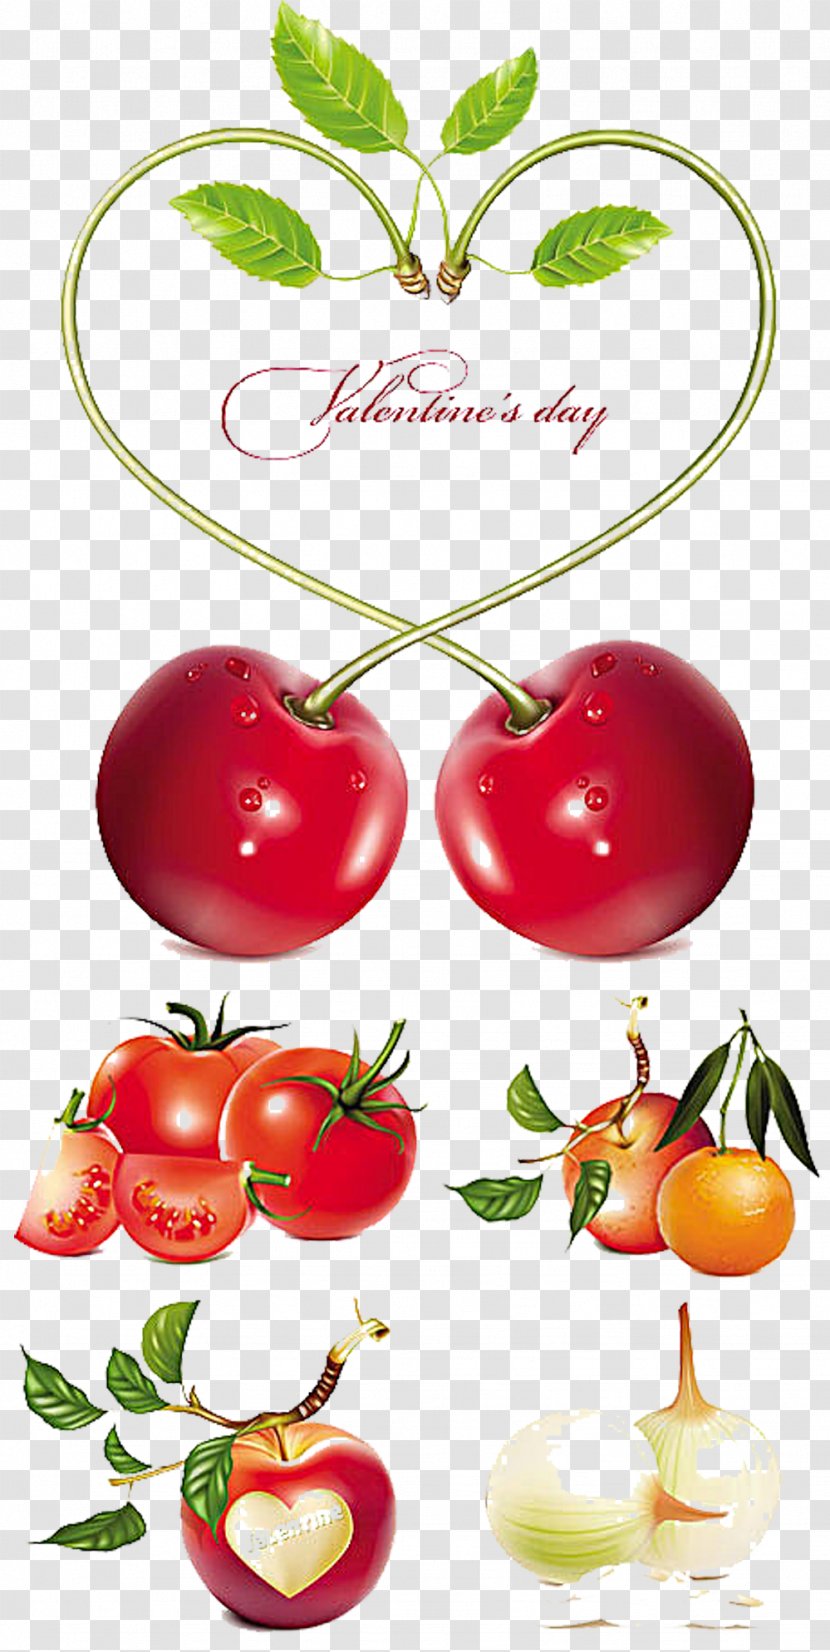 Cherry Valentines Day Heart Clip Art - Diet Food - Creative Picture Material Transparent PNG